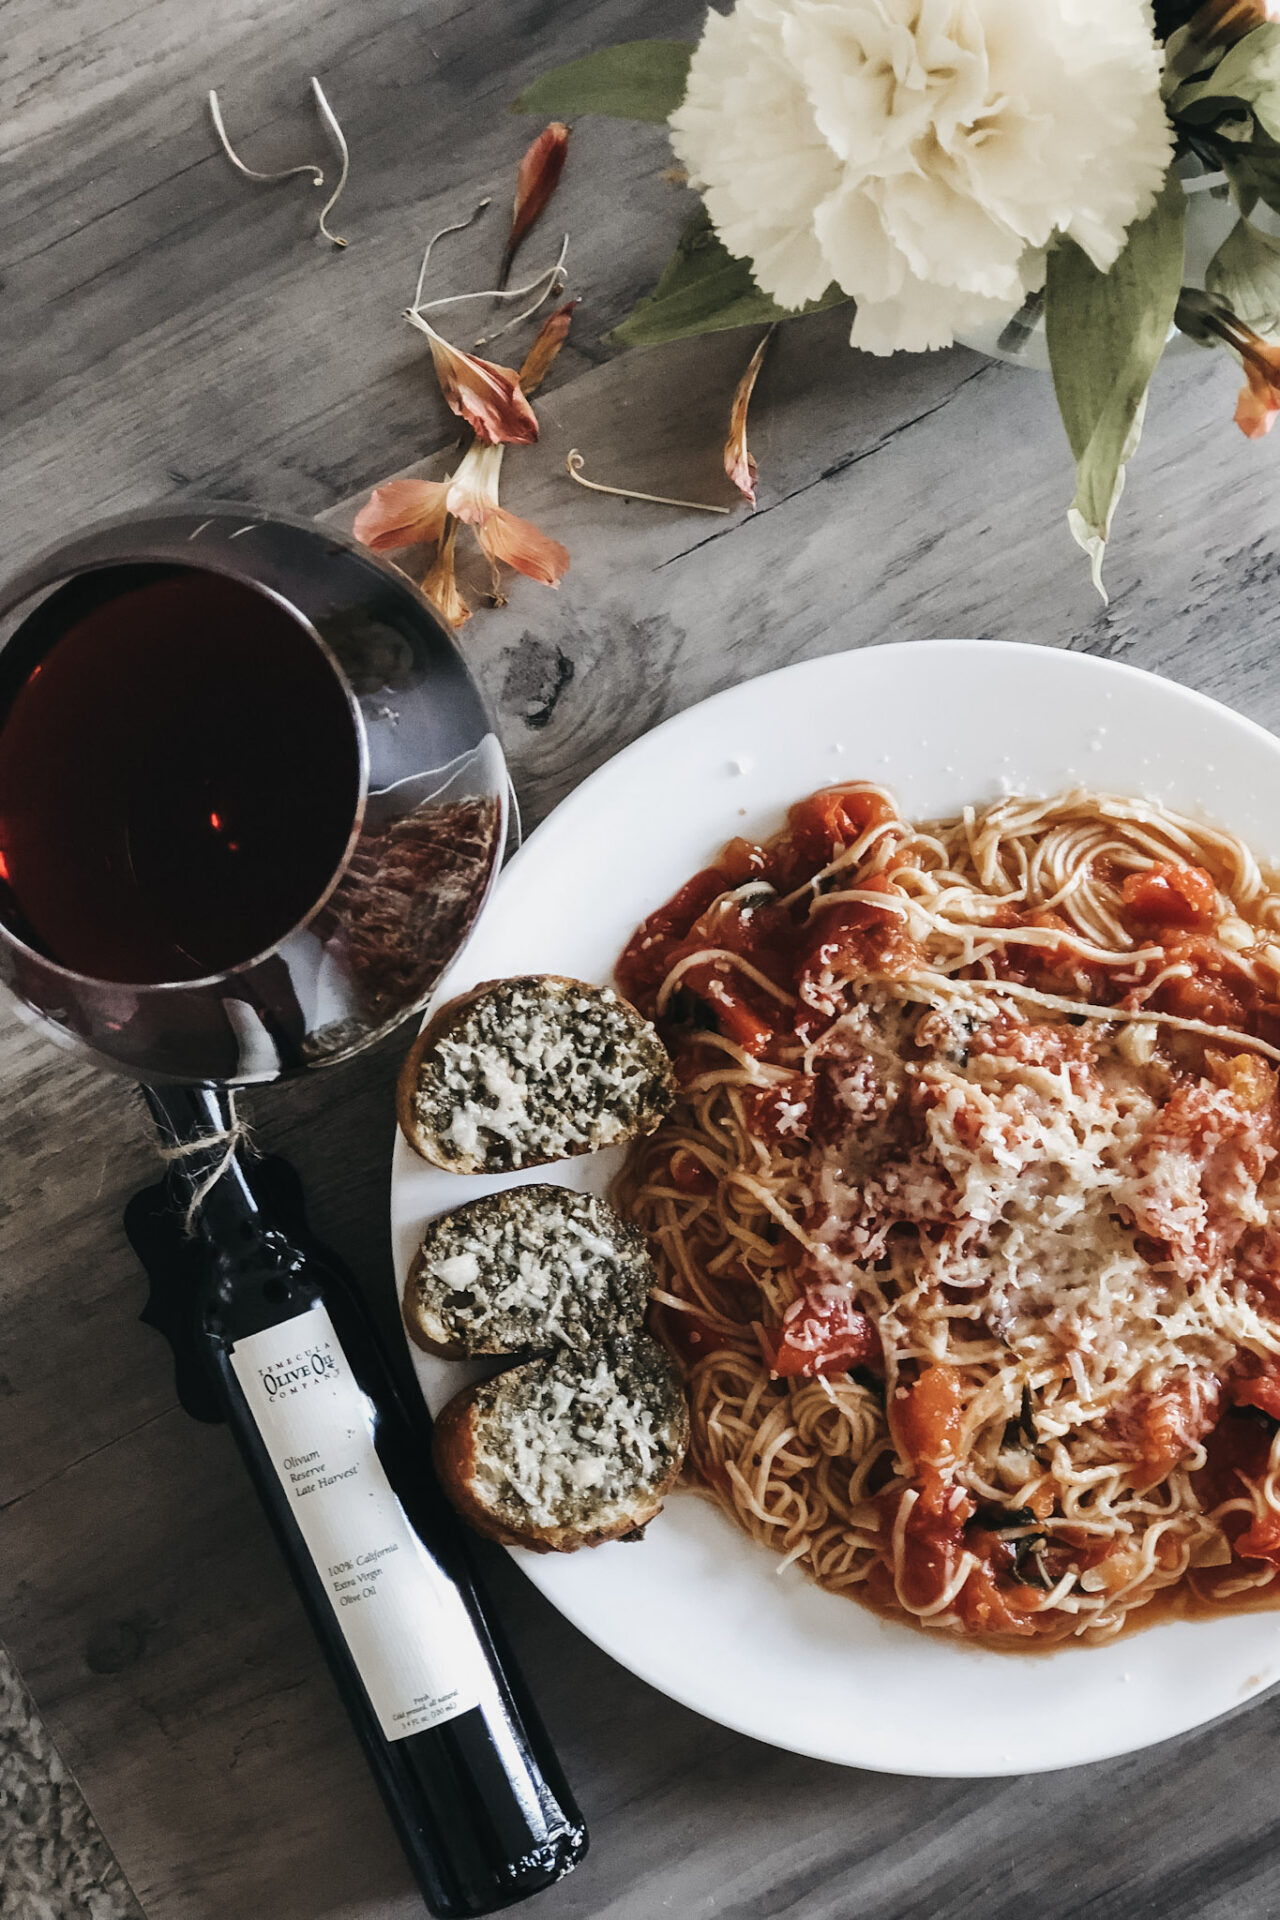 Spaghetti paired with red wine